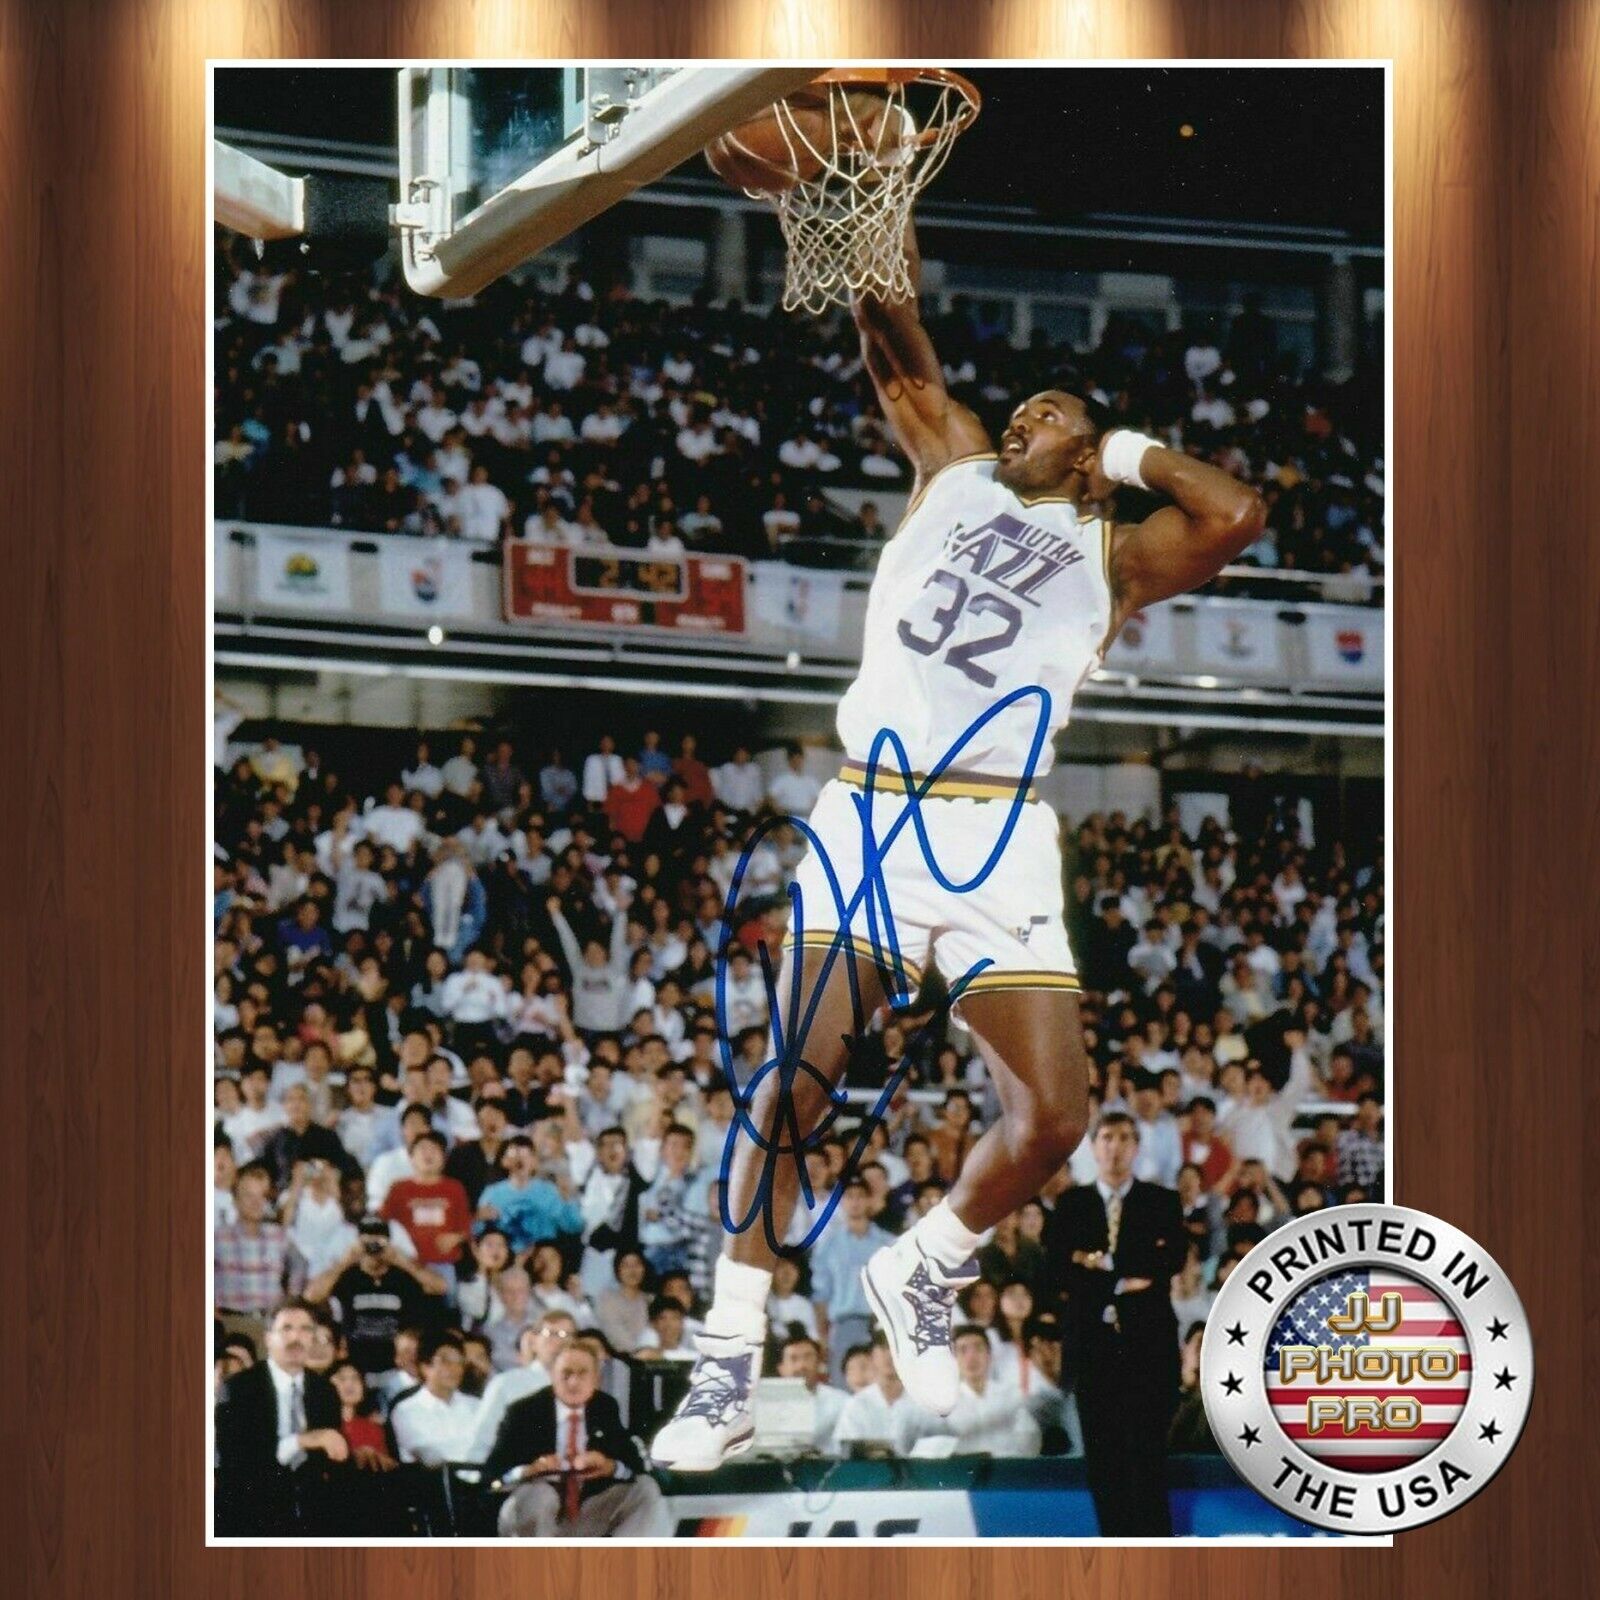 Karl Malone Autographed Signed 8x10 Photo Poster painting (HOF Jazz) REPRINT